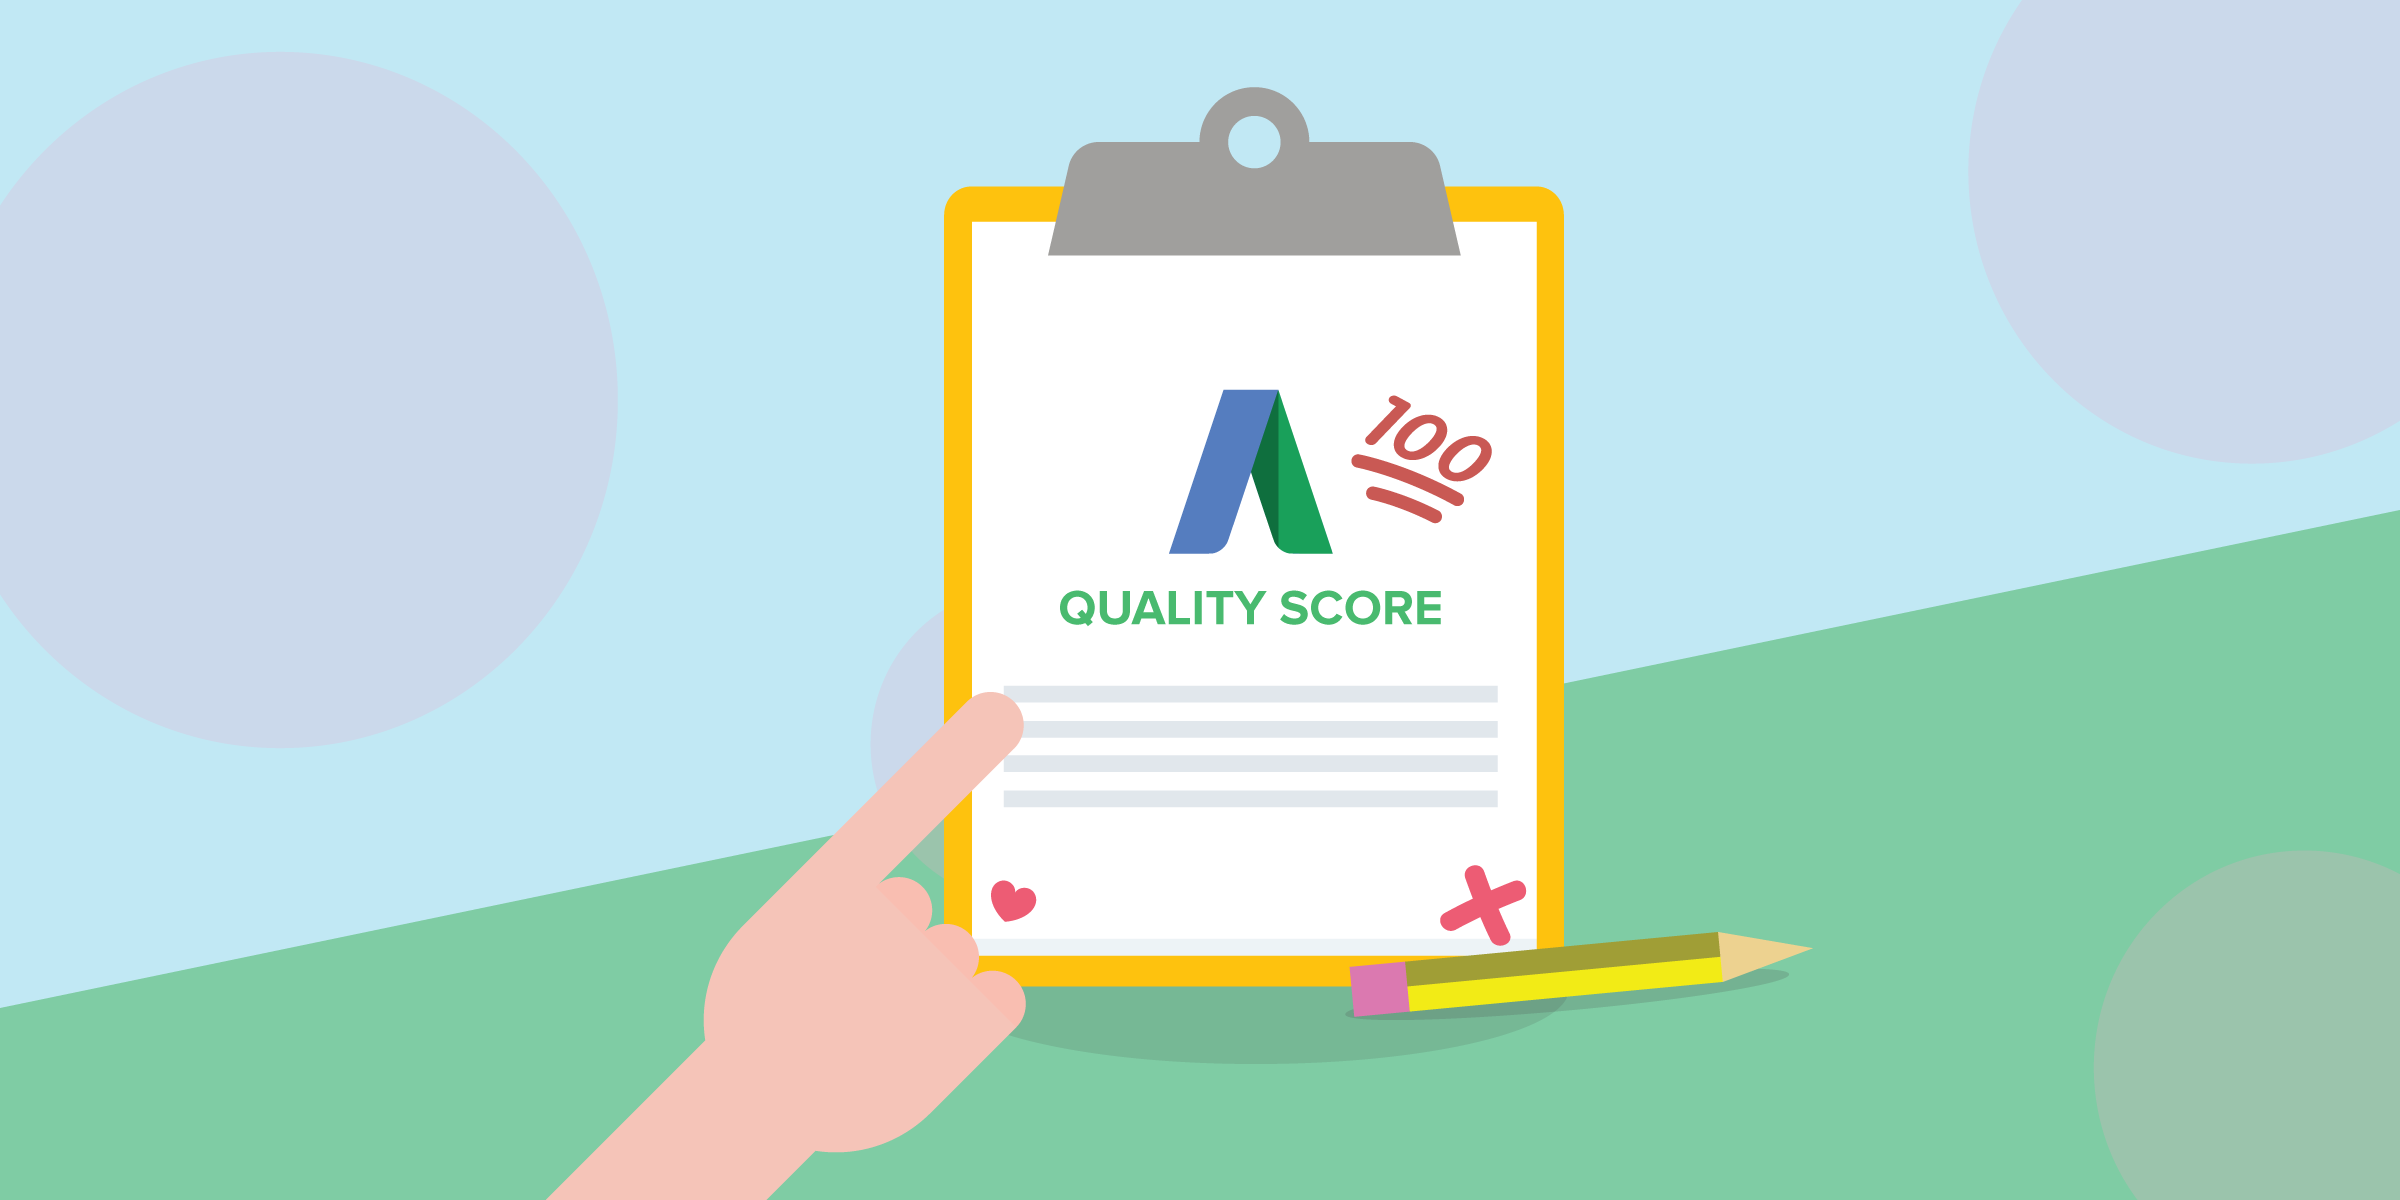 All that may be responsible for a low quality keyword score